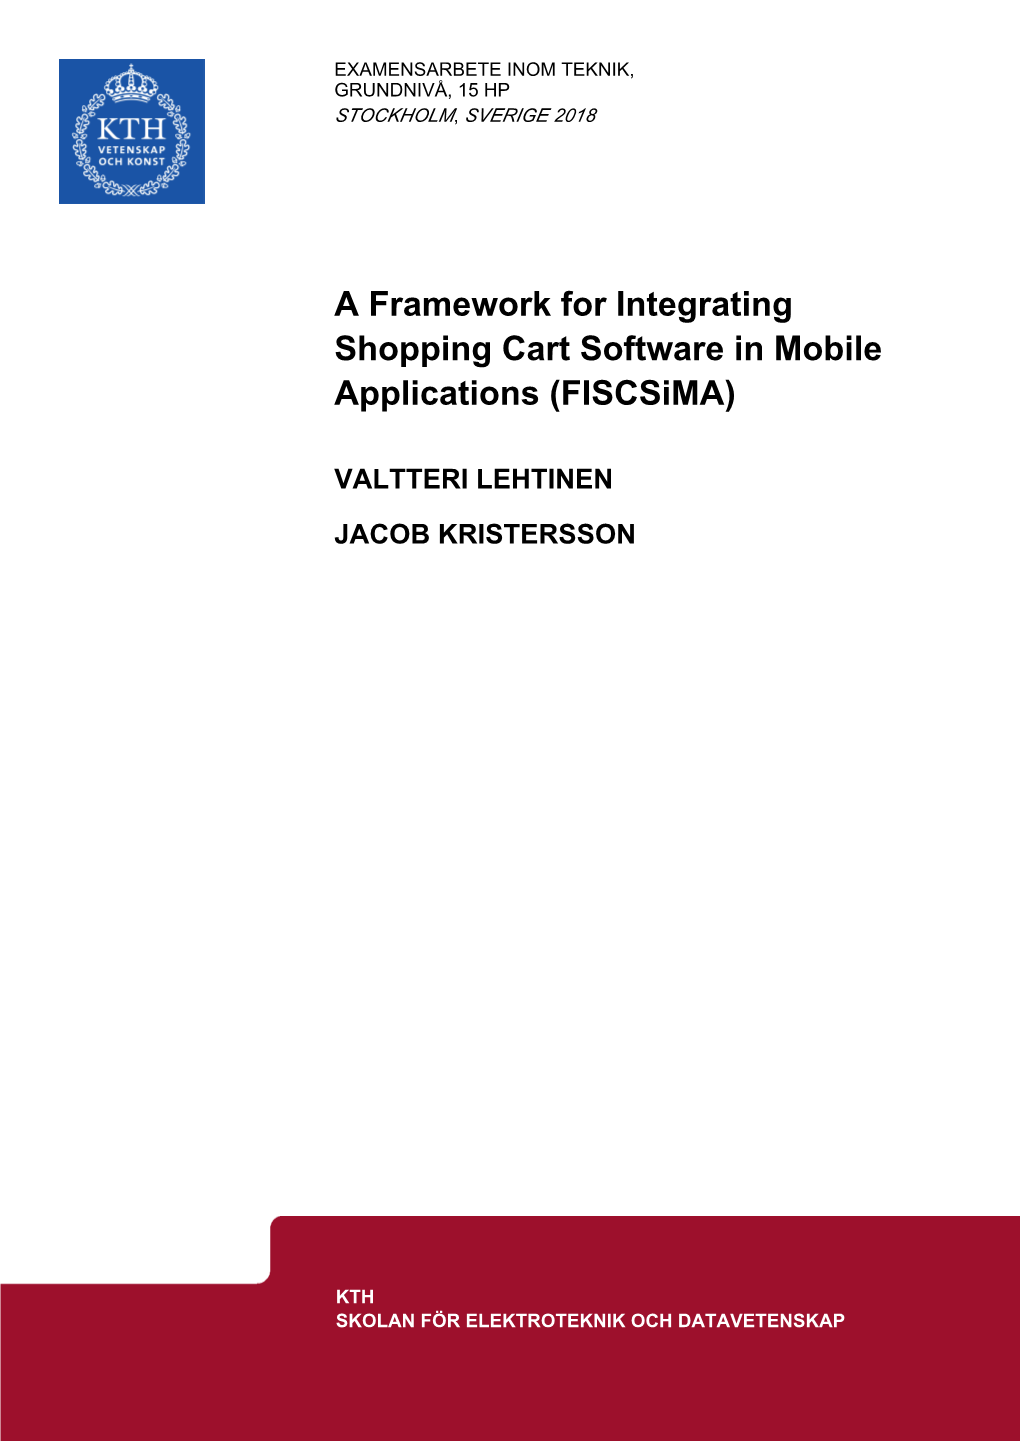 A Framework for Integrating Shopping Cart Software in Mobile Applications (Fiscsima)